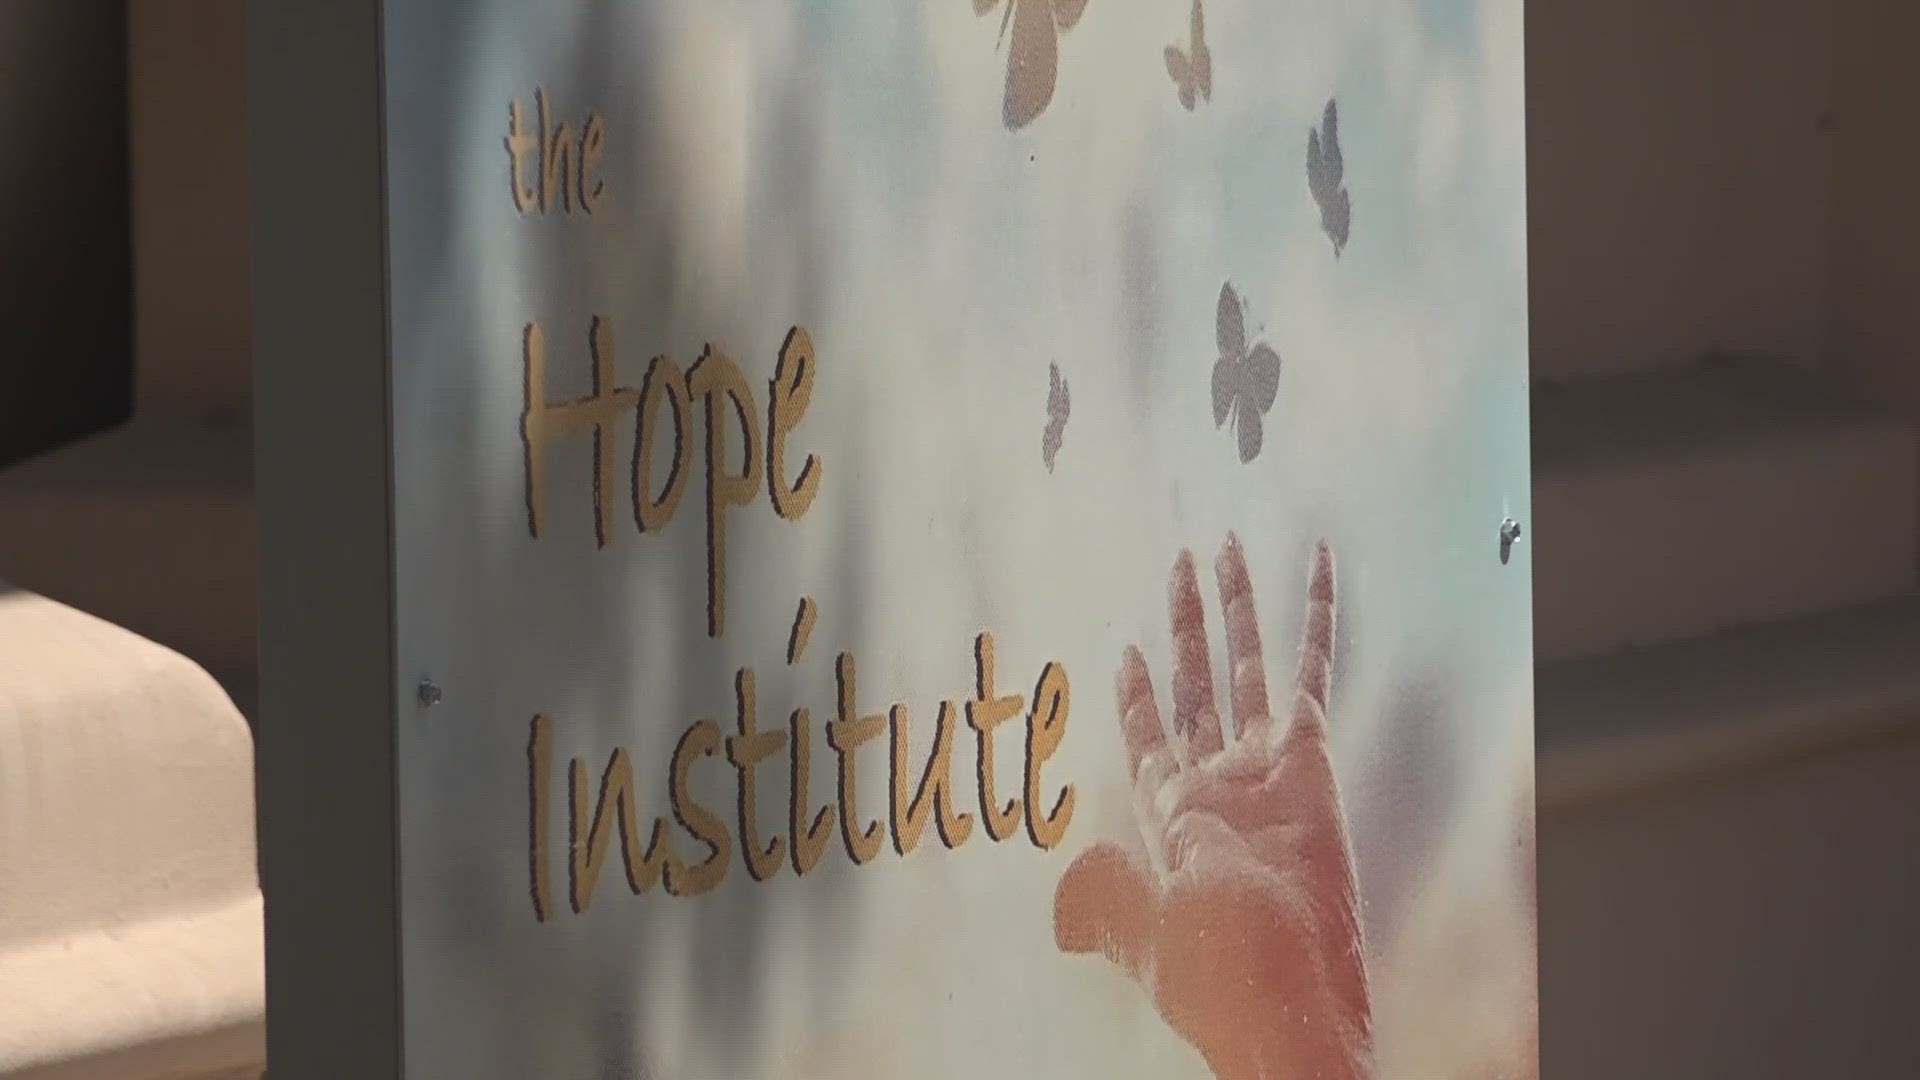 The Hope Institute in Chandler is just one of the new resources that will be available to students in the CUSD during the new school year.